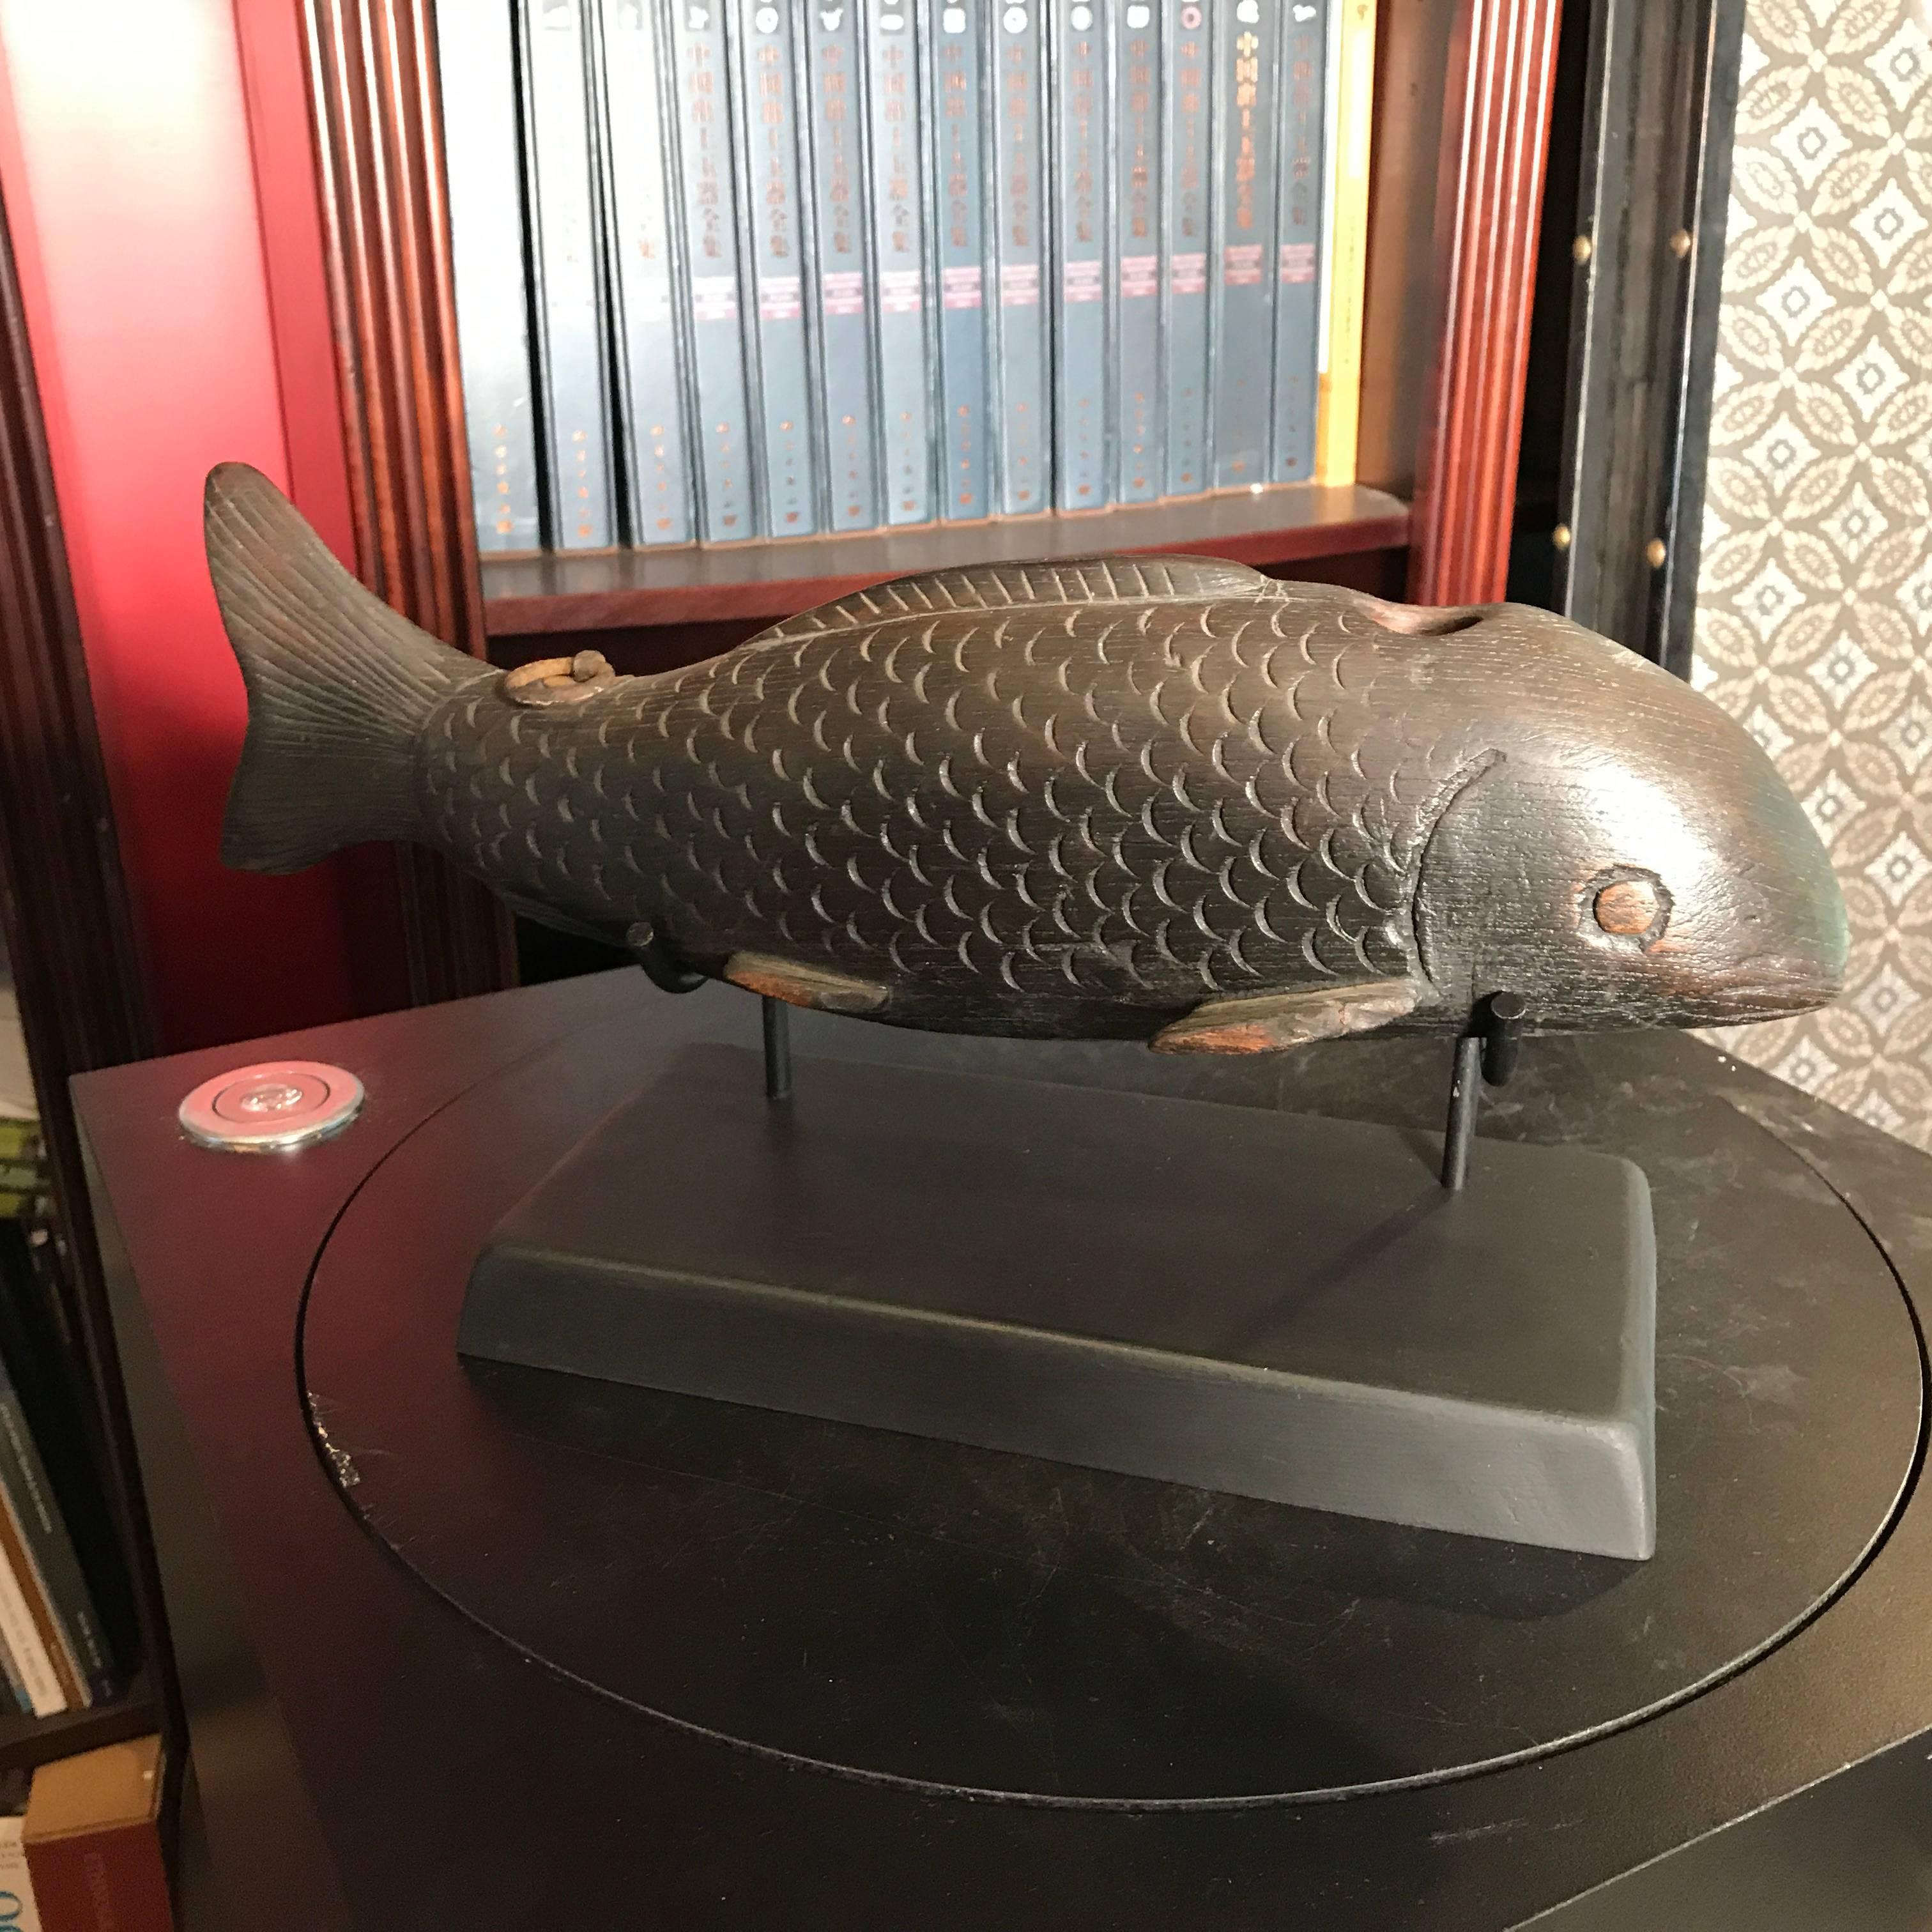 A fine old Japanese 19th century hand-carved wooden KOI fish symbolic of prosperity, perseverance and good fortune. Custom black wood display base is included.

Originally a crossbar for a hanging pot hook ensemble, these were often displayed in